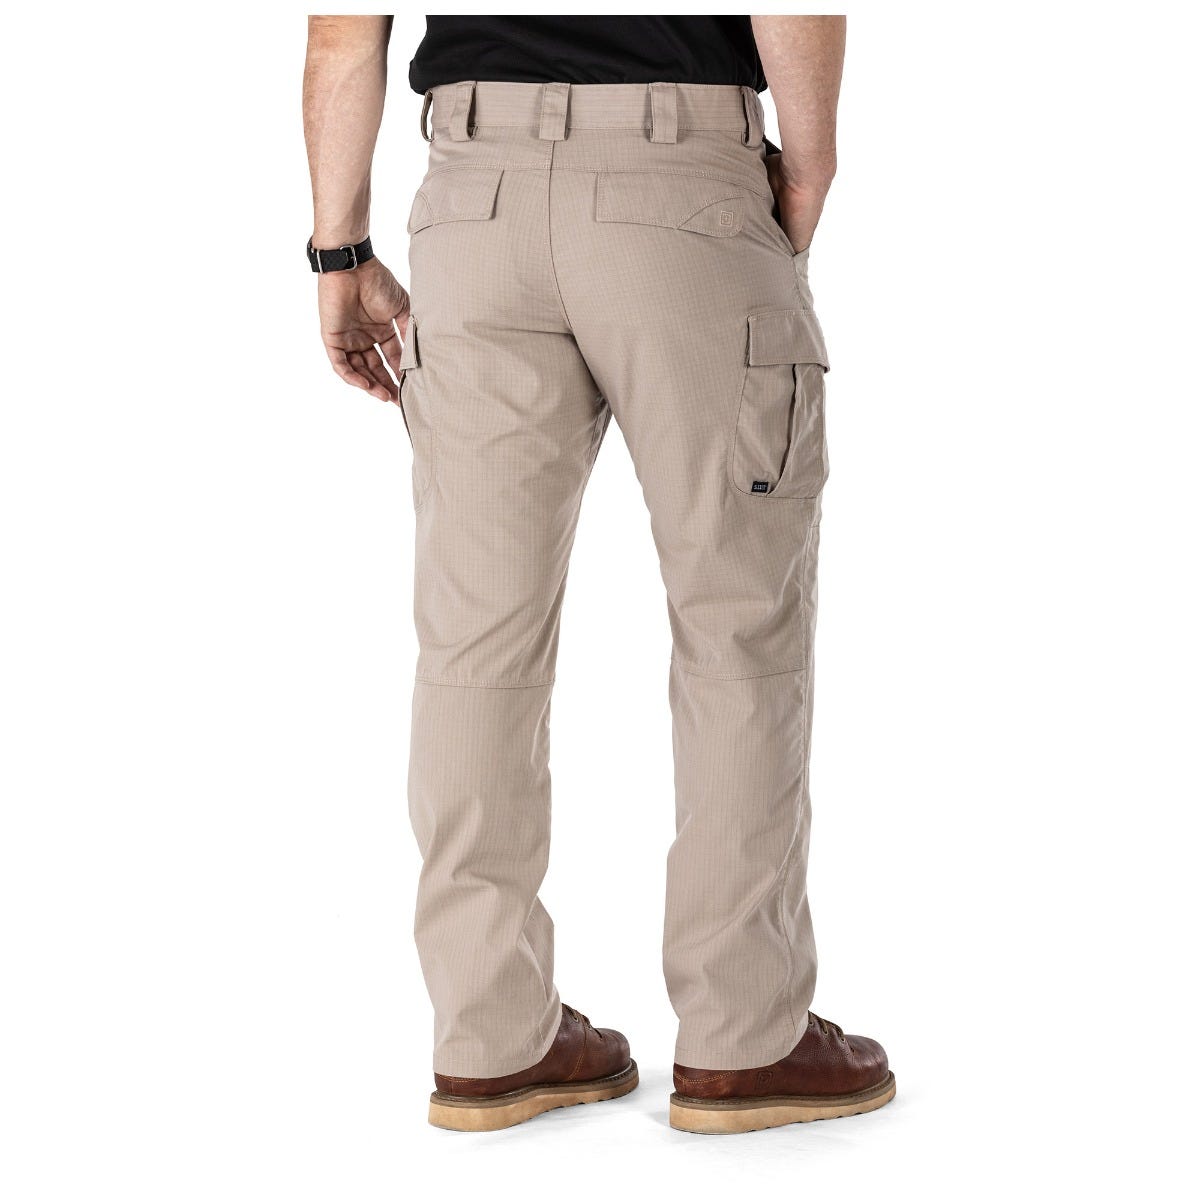 Self-adjusting Waistband Pant: Ensures a secure and comfortable fit.